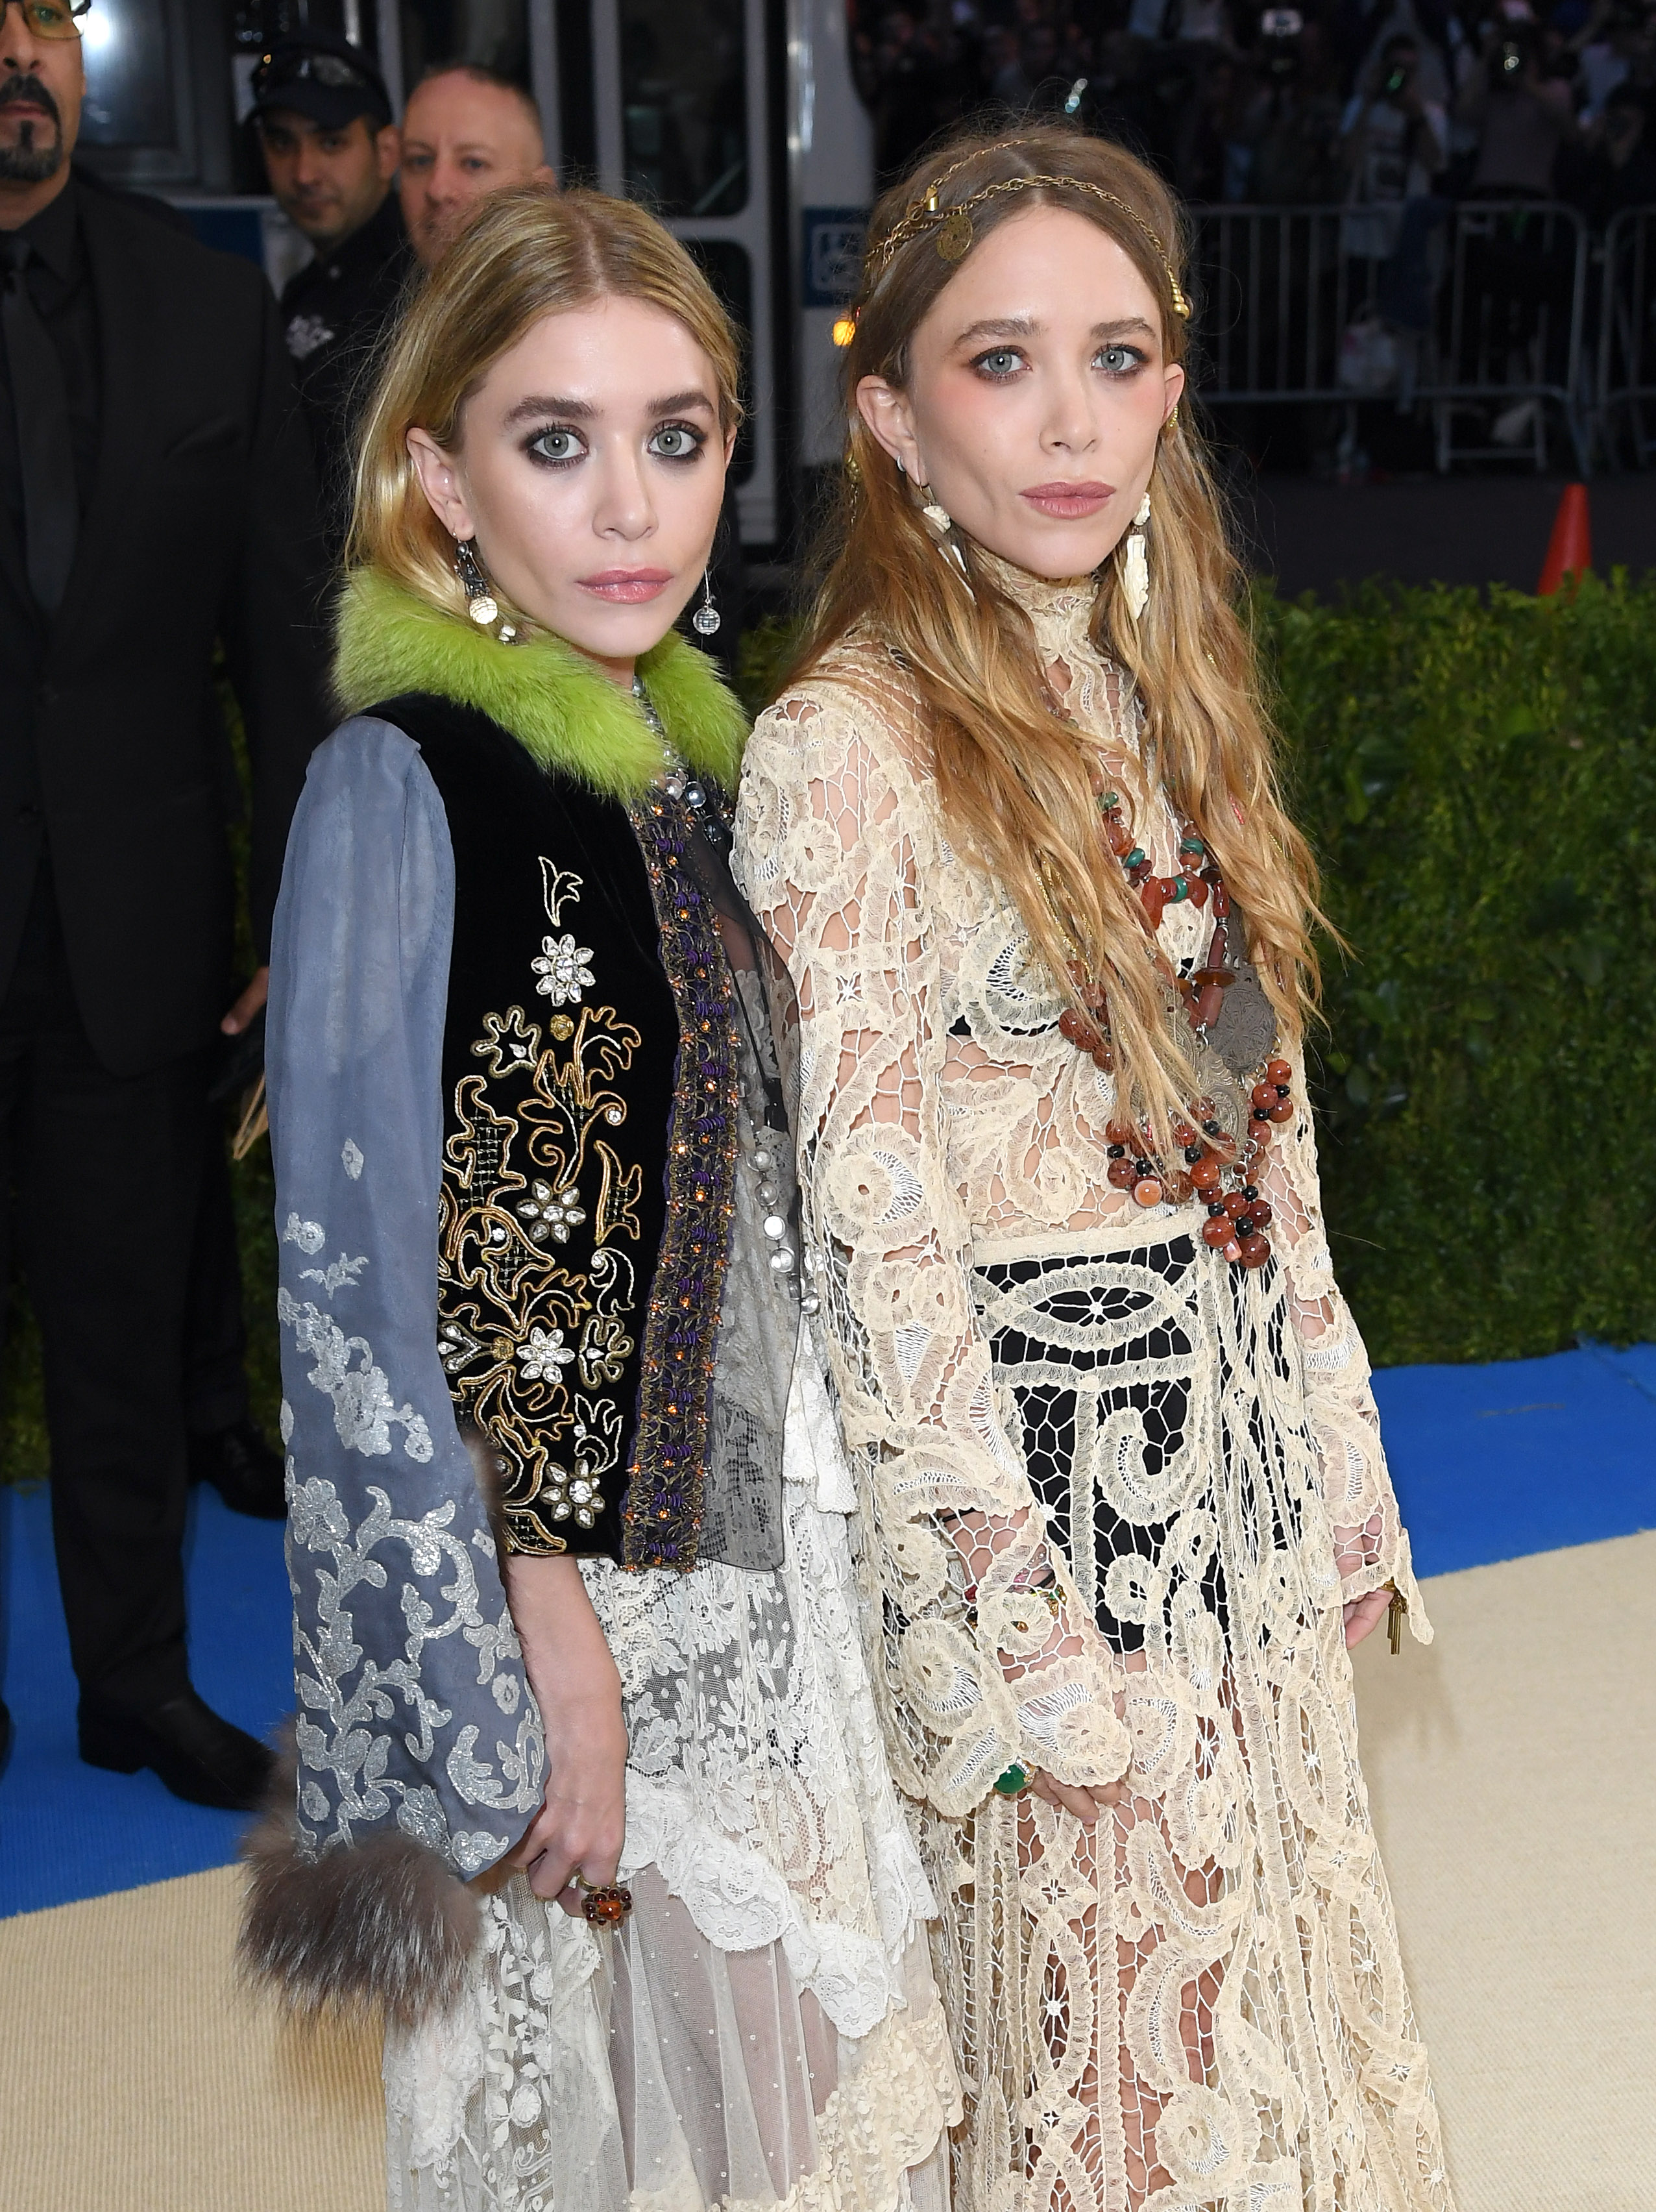 Mary-Kate and Ashley Olsen Still Look Identical in Some Pics